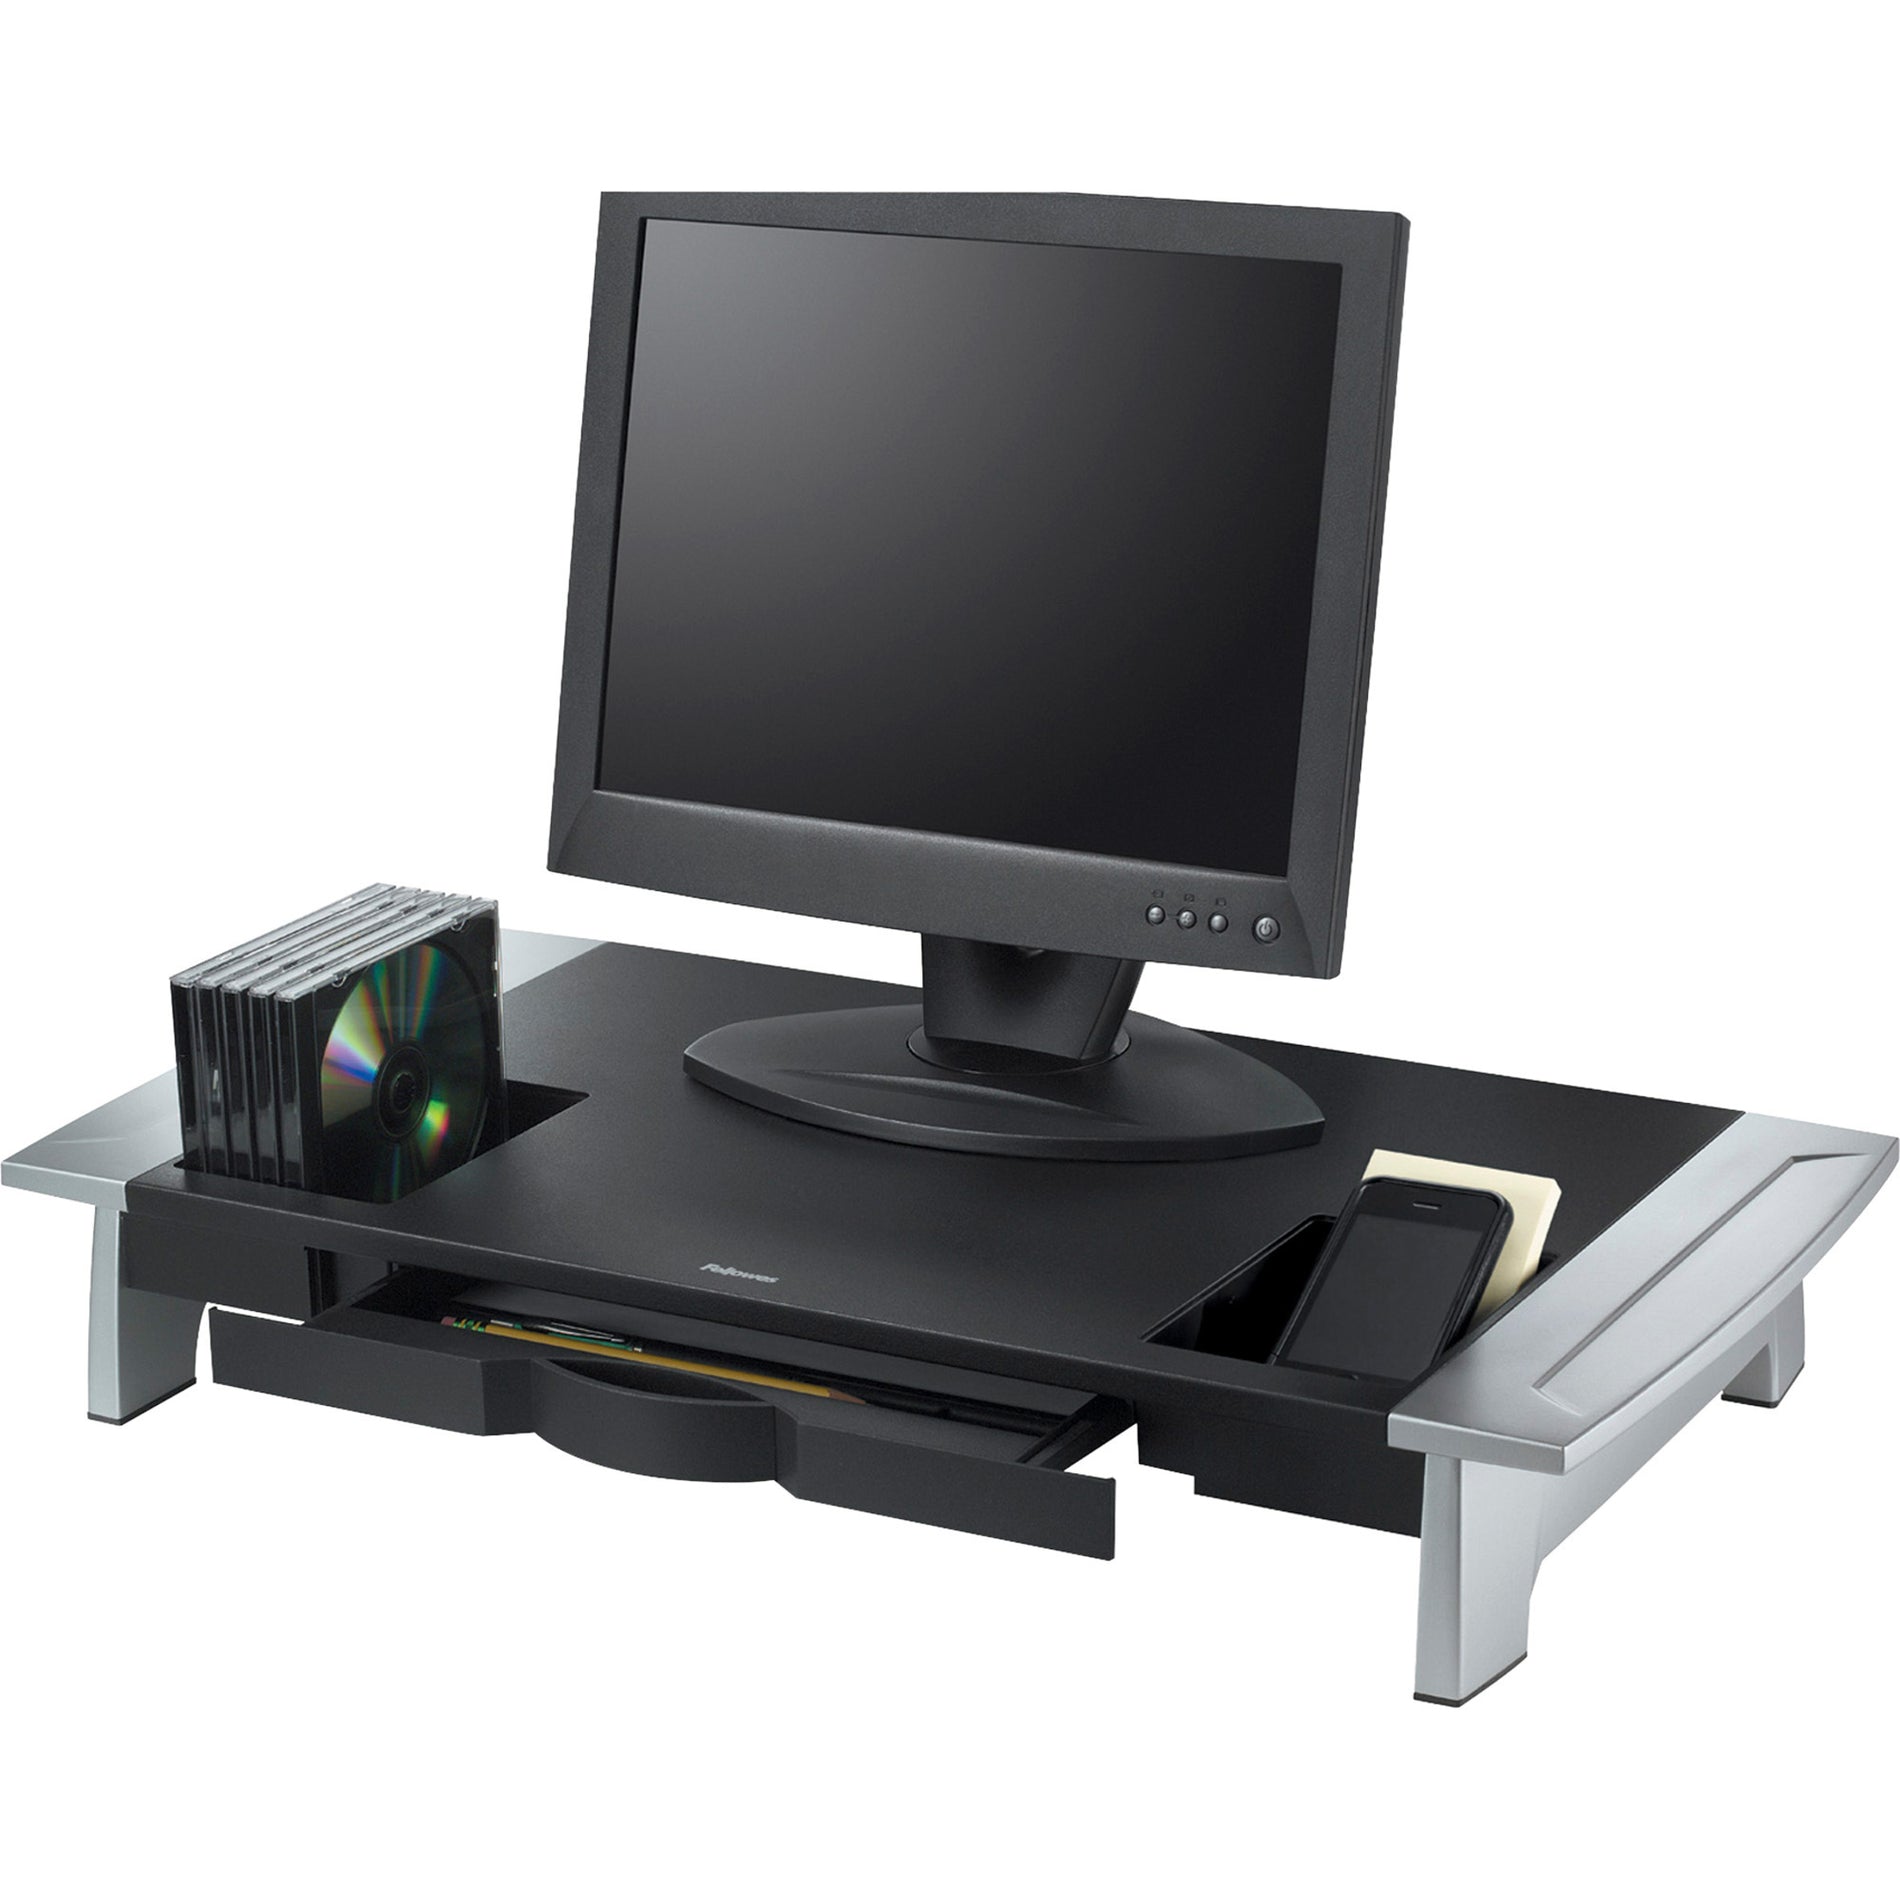 Fellowes 8031001 Office Suites Premium Monitor Riser, Adjustable Height, Cup Holder, Media Storage